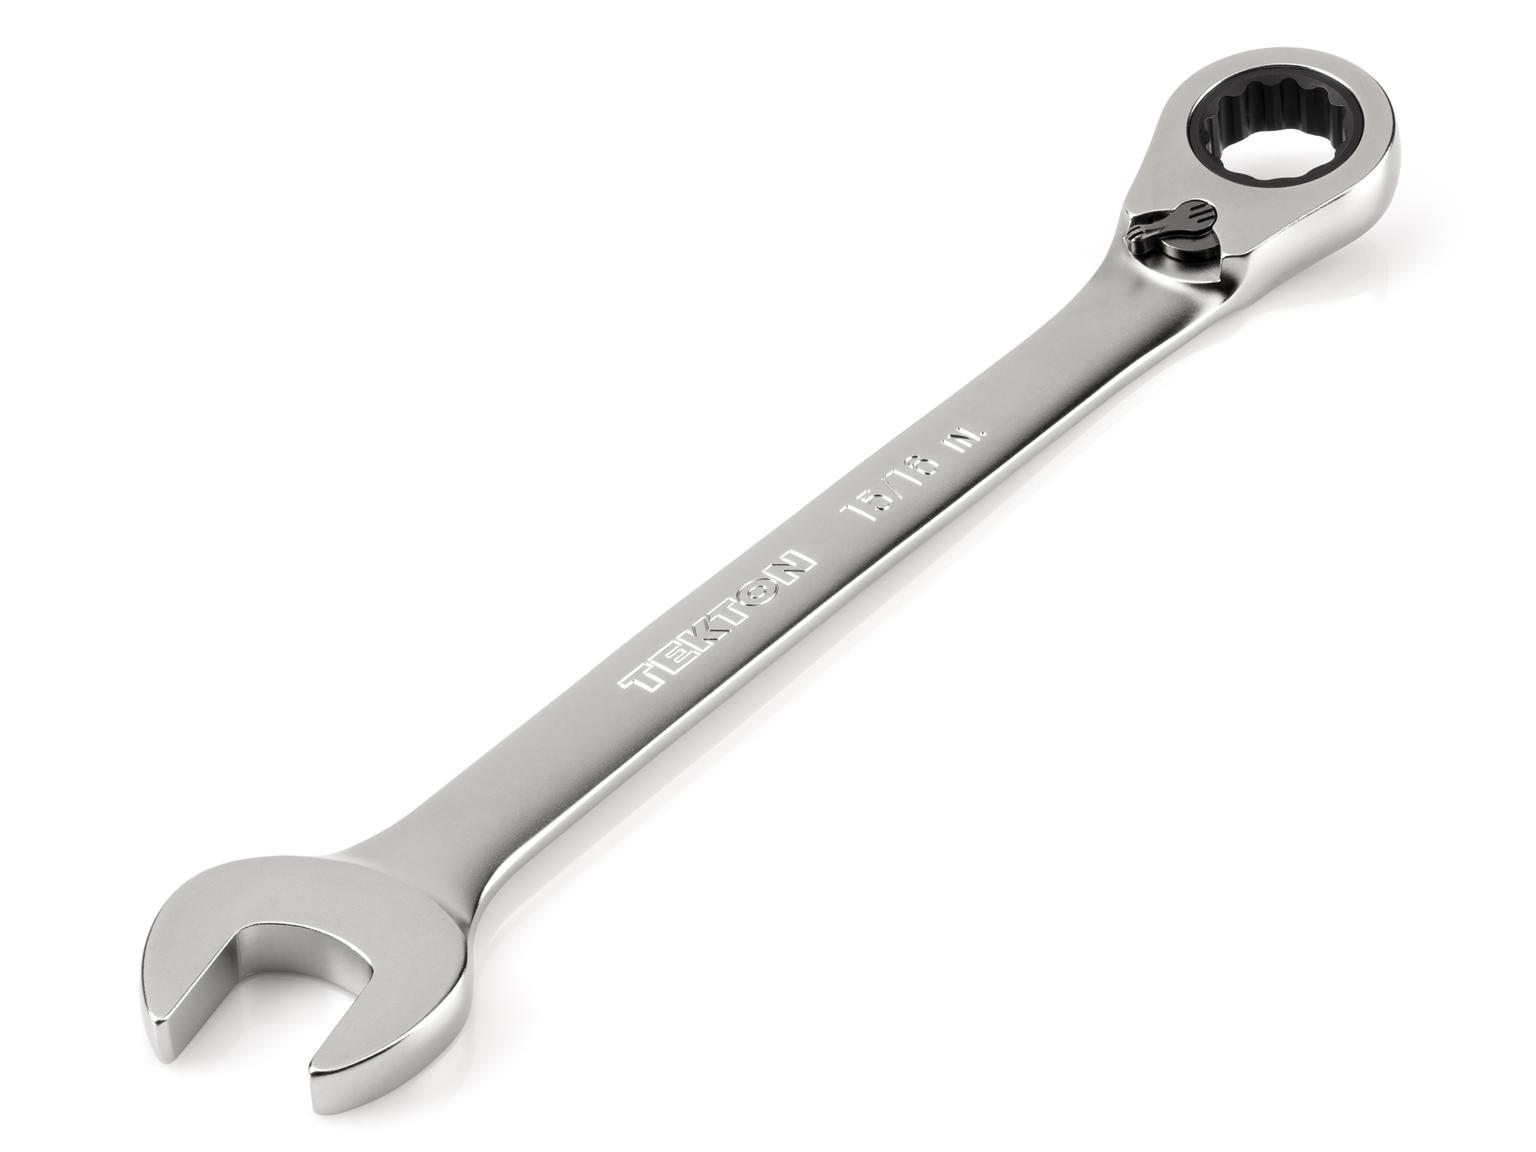 TEKTON WRC23324-T 15/16 Inch Reversible 12-Point Ratcheting Combination Wrench